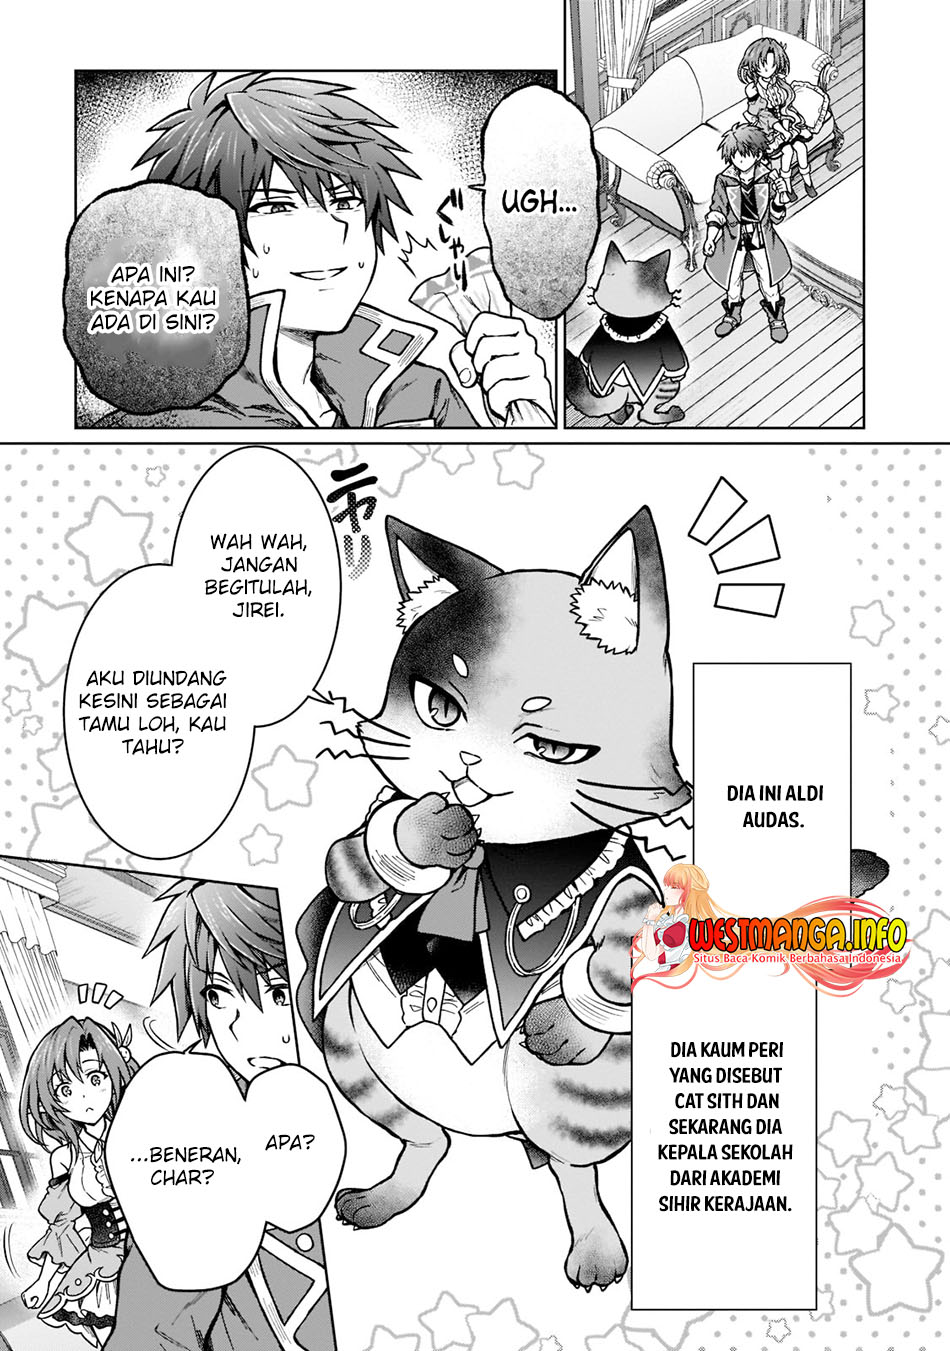 Dilarang COPAS - situs resmi www.mangacanblog.com - Komik d rank adventurer invited by a brave party and the stalking princess 015 - chapter 15 16 Indonesia d rank adventurer invited by a brave party and the stalking princess 015 - chapter 15 Terbaru 14|Baca Manga Komik Indonesia|Mangacan